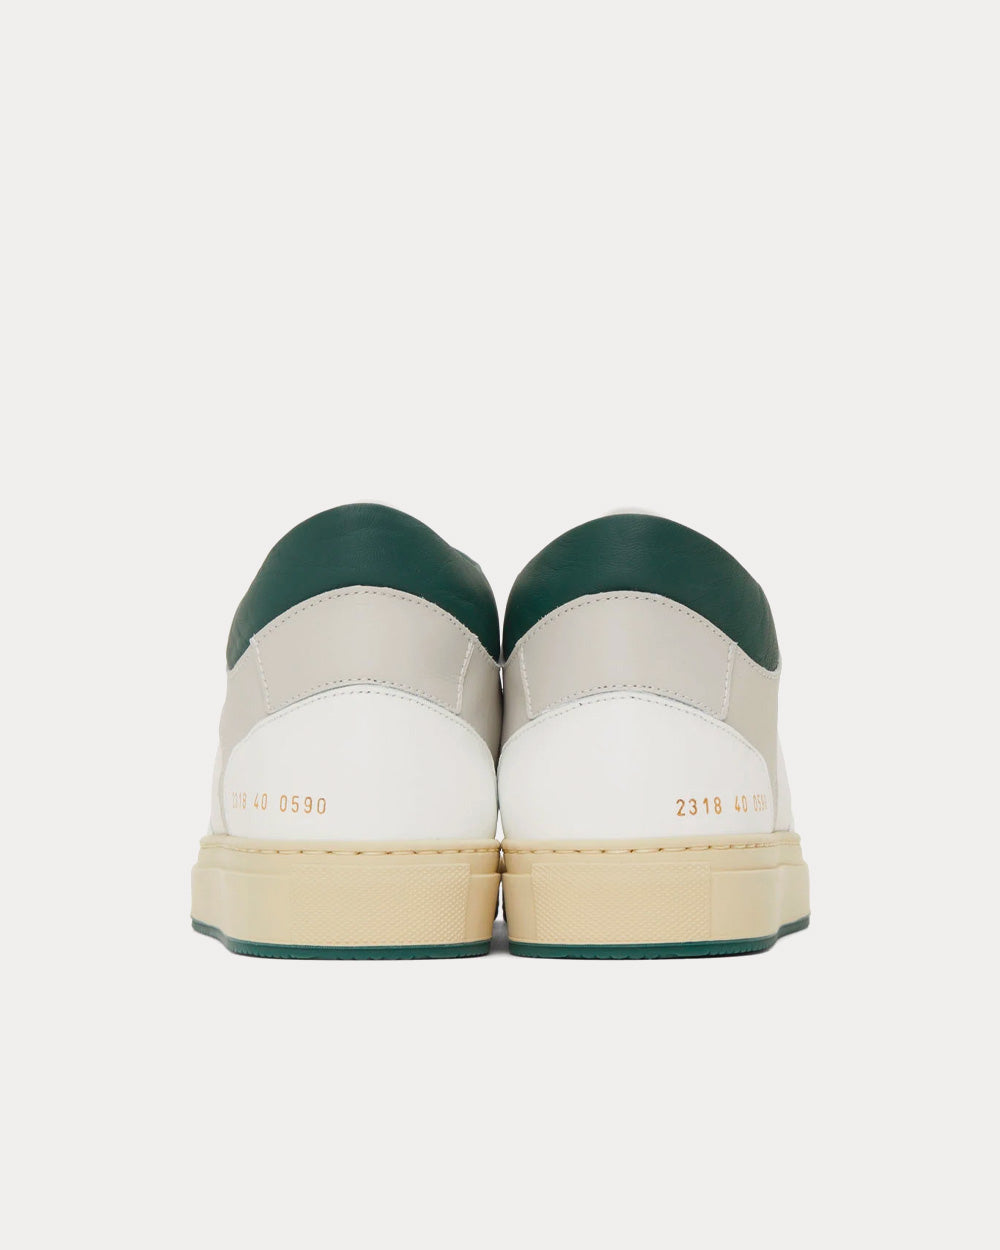 Common Projects - BBall Decades White / Green Mid Top Sneakers